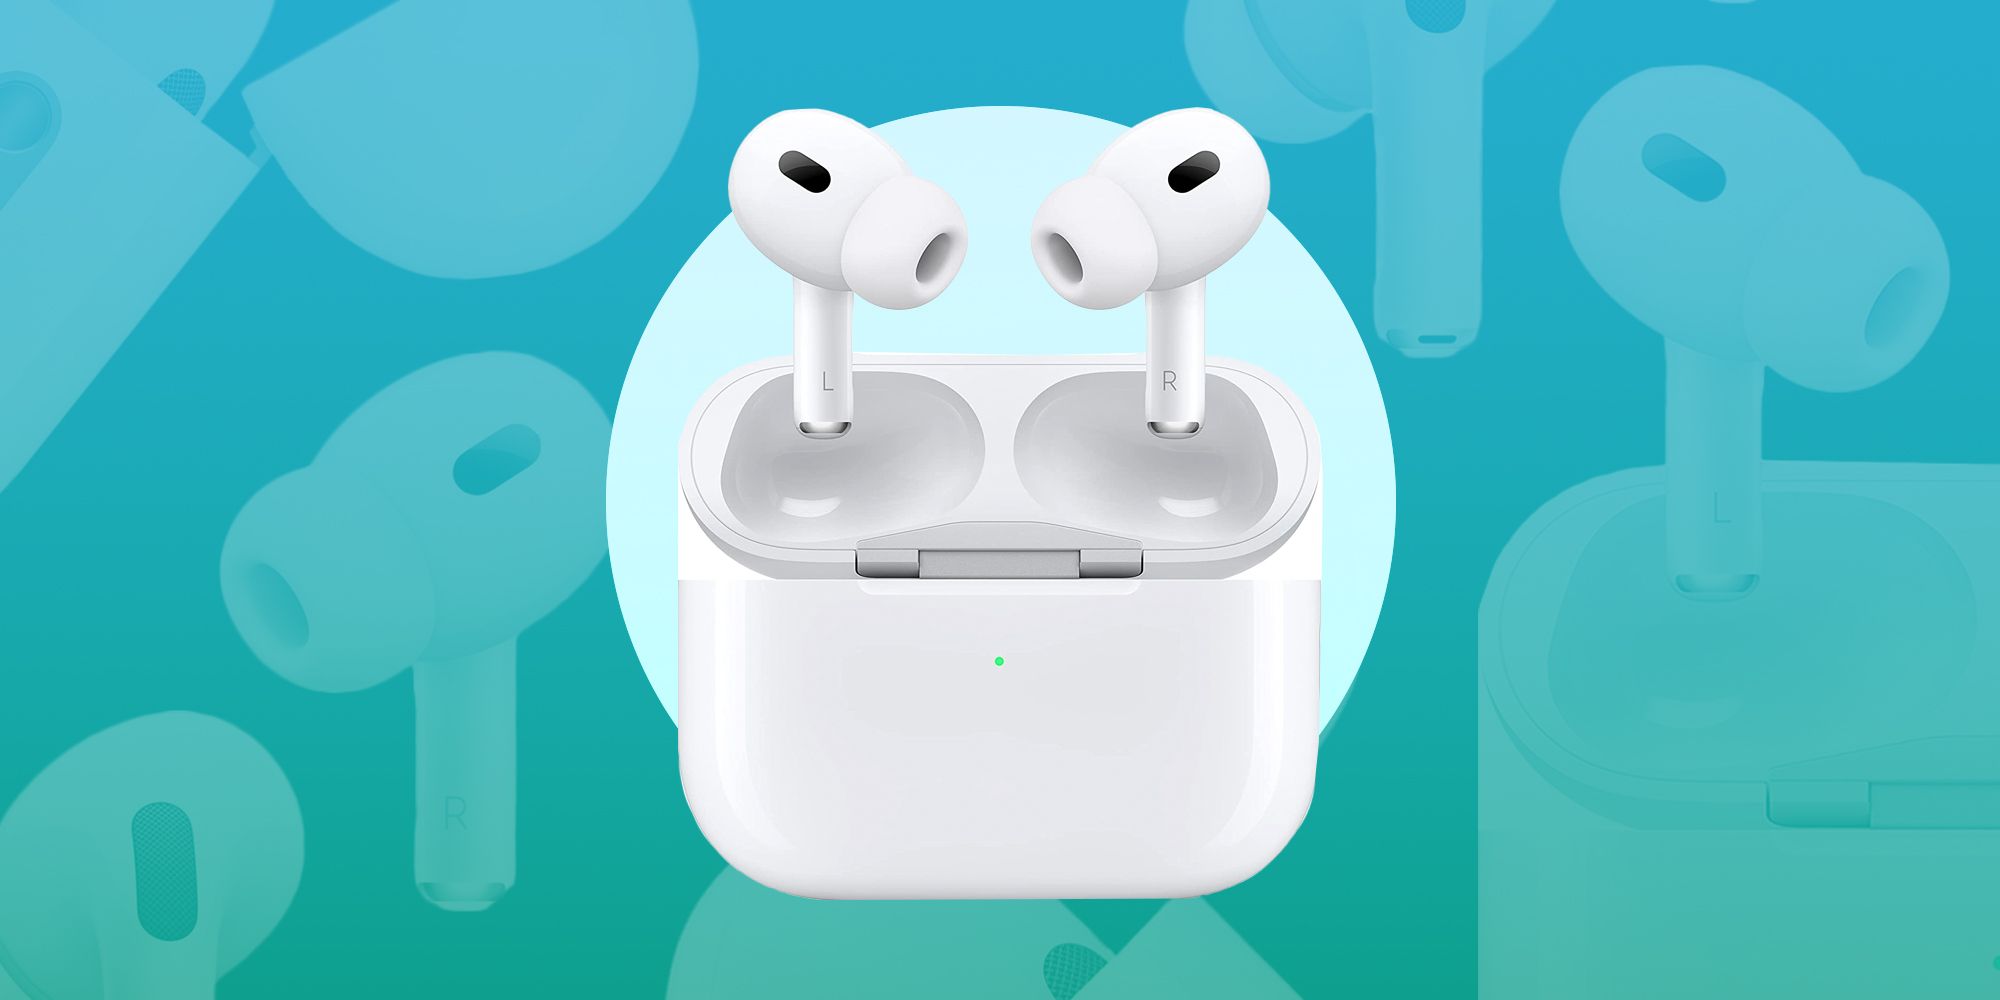 AirPods Pro (2nd Generation) Review: Meet Apple's Best Wireless Earbuds